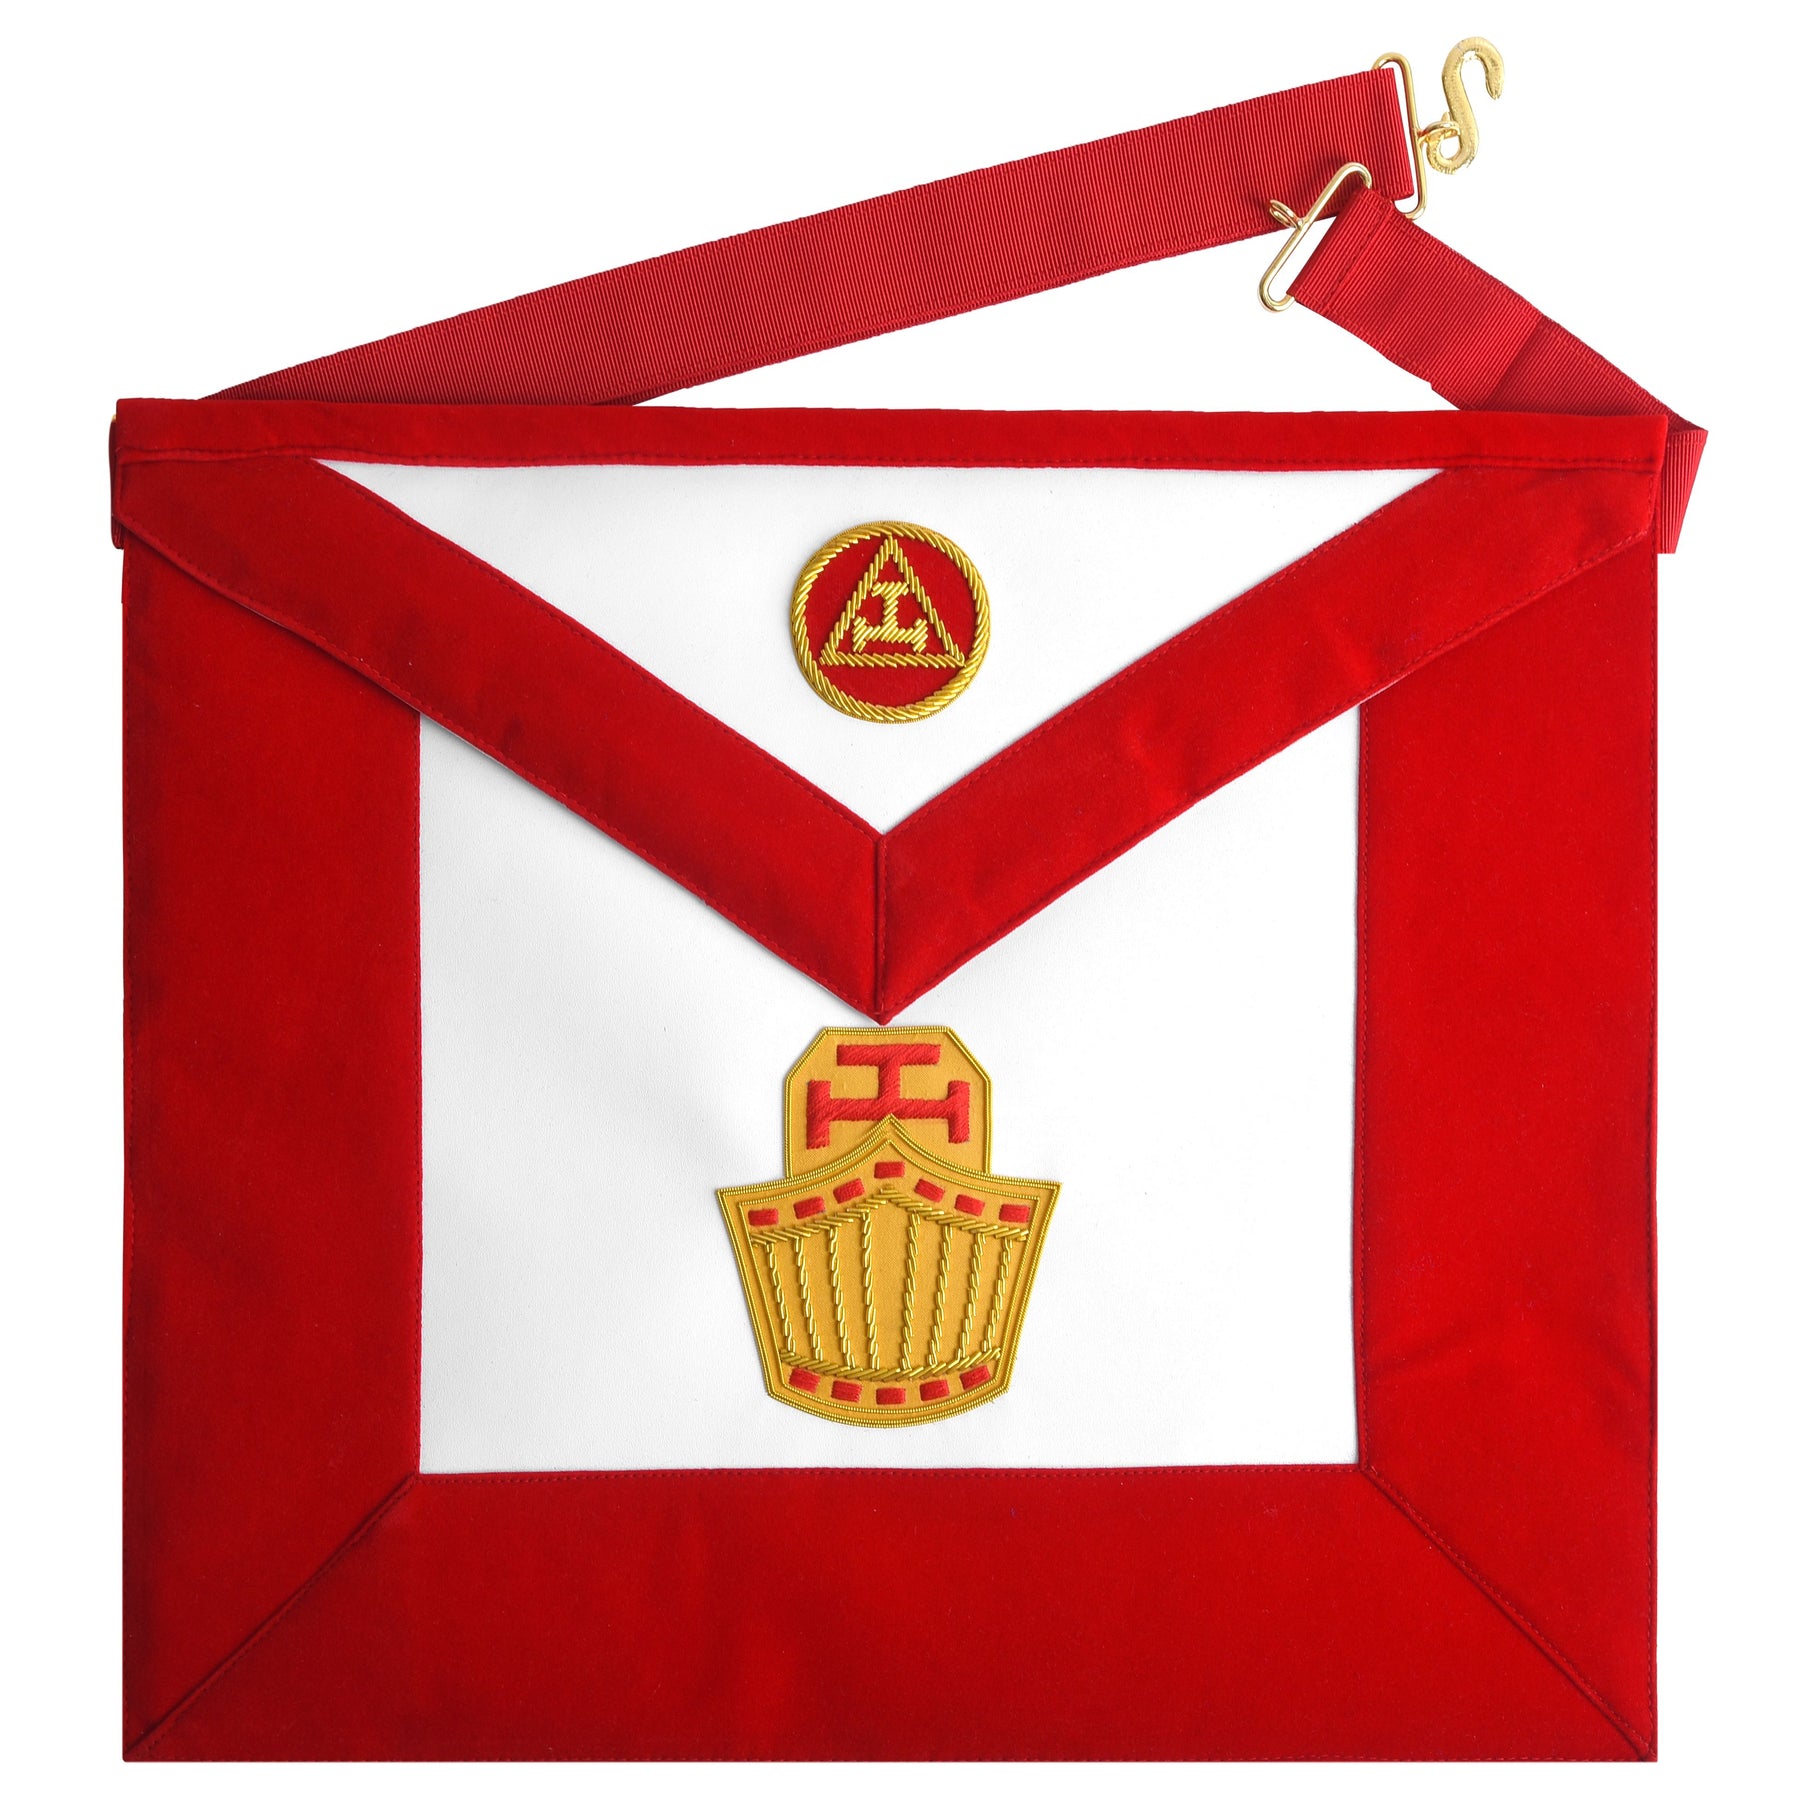 High Priest Royal Arch Chapter Apron - Red Velvet & Gold Embroidery - Bricks Masons